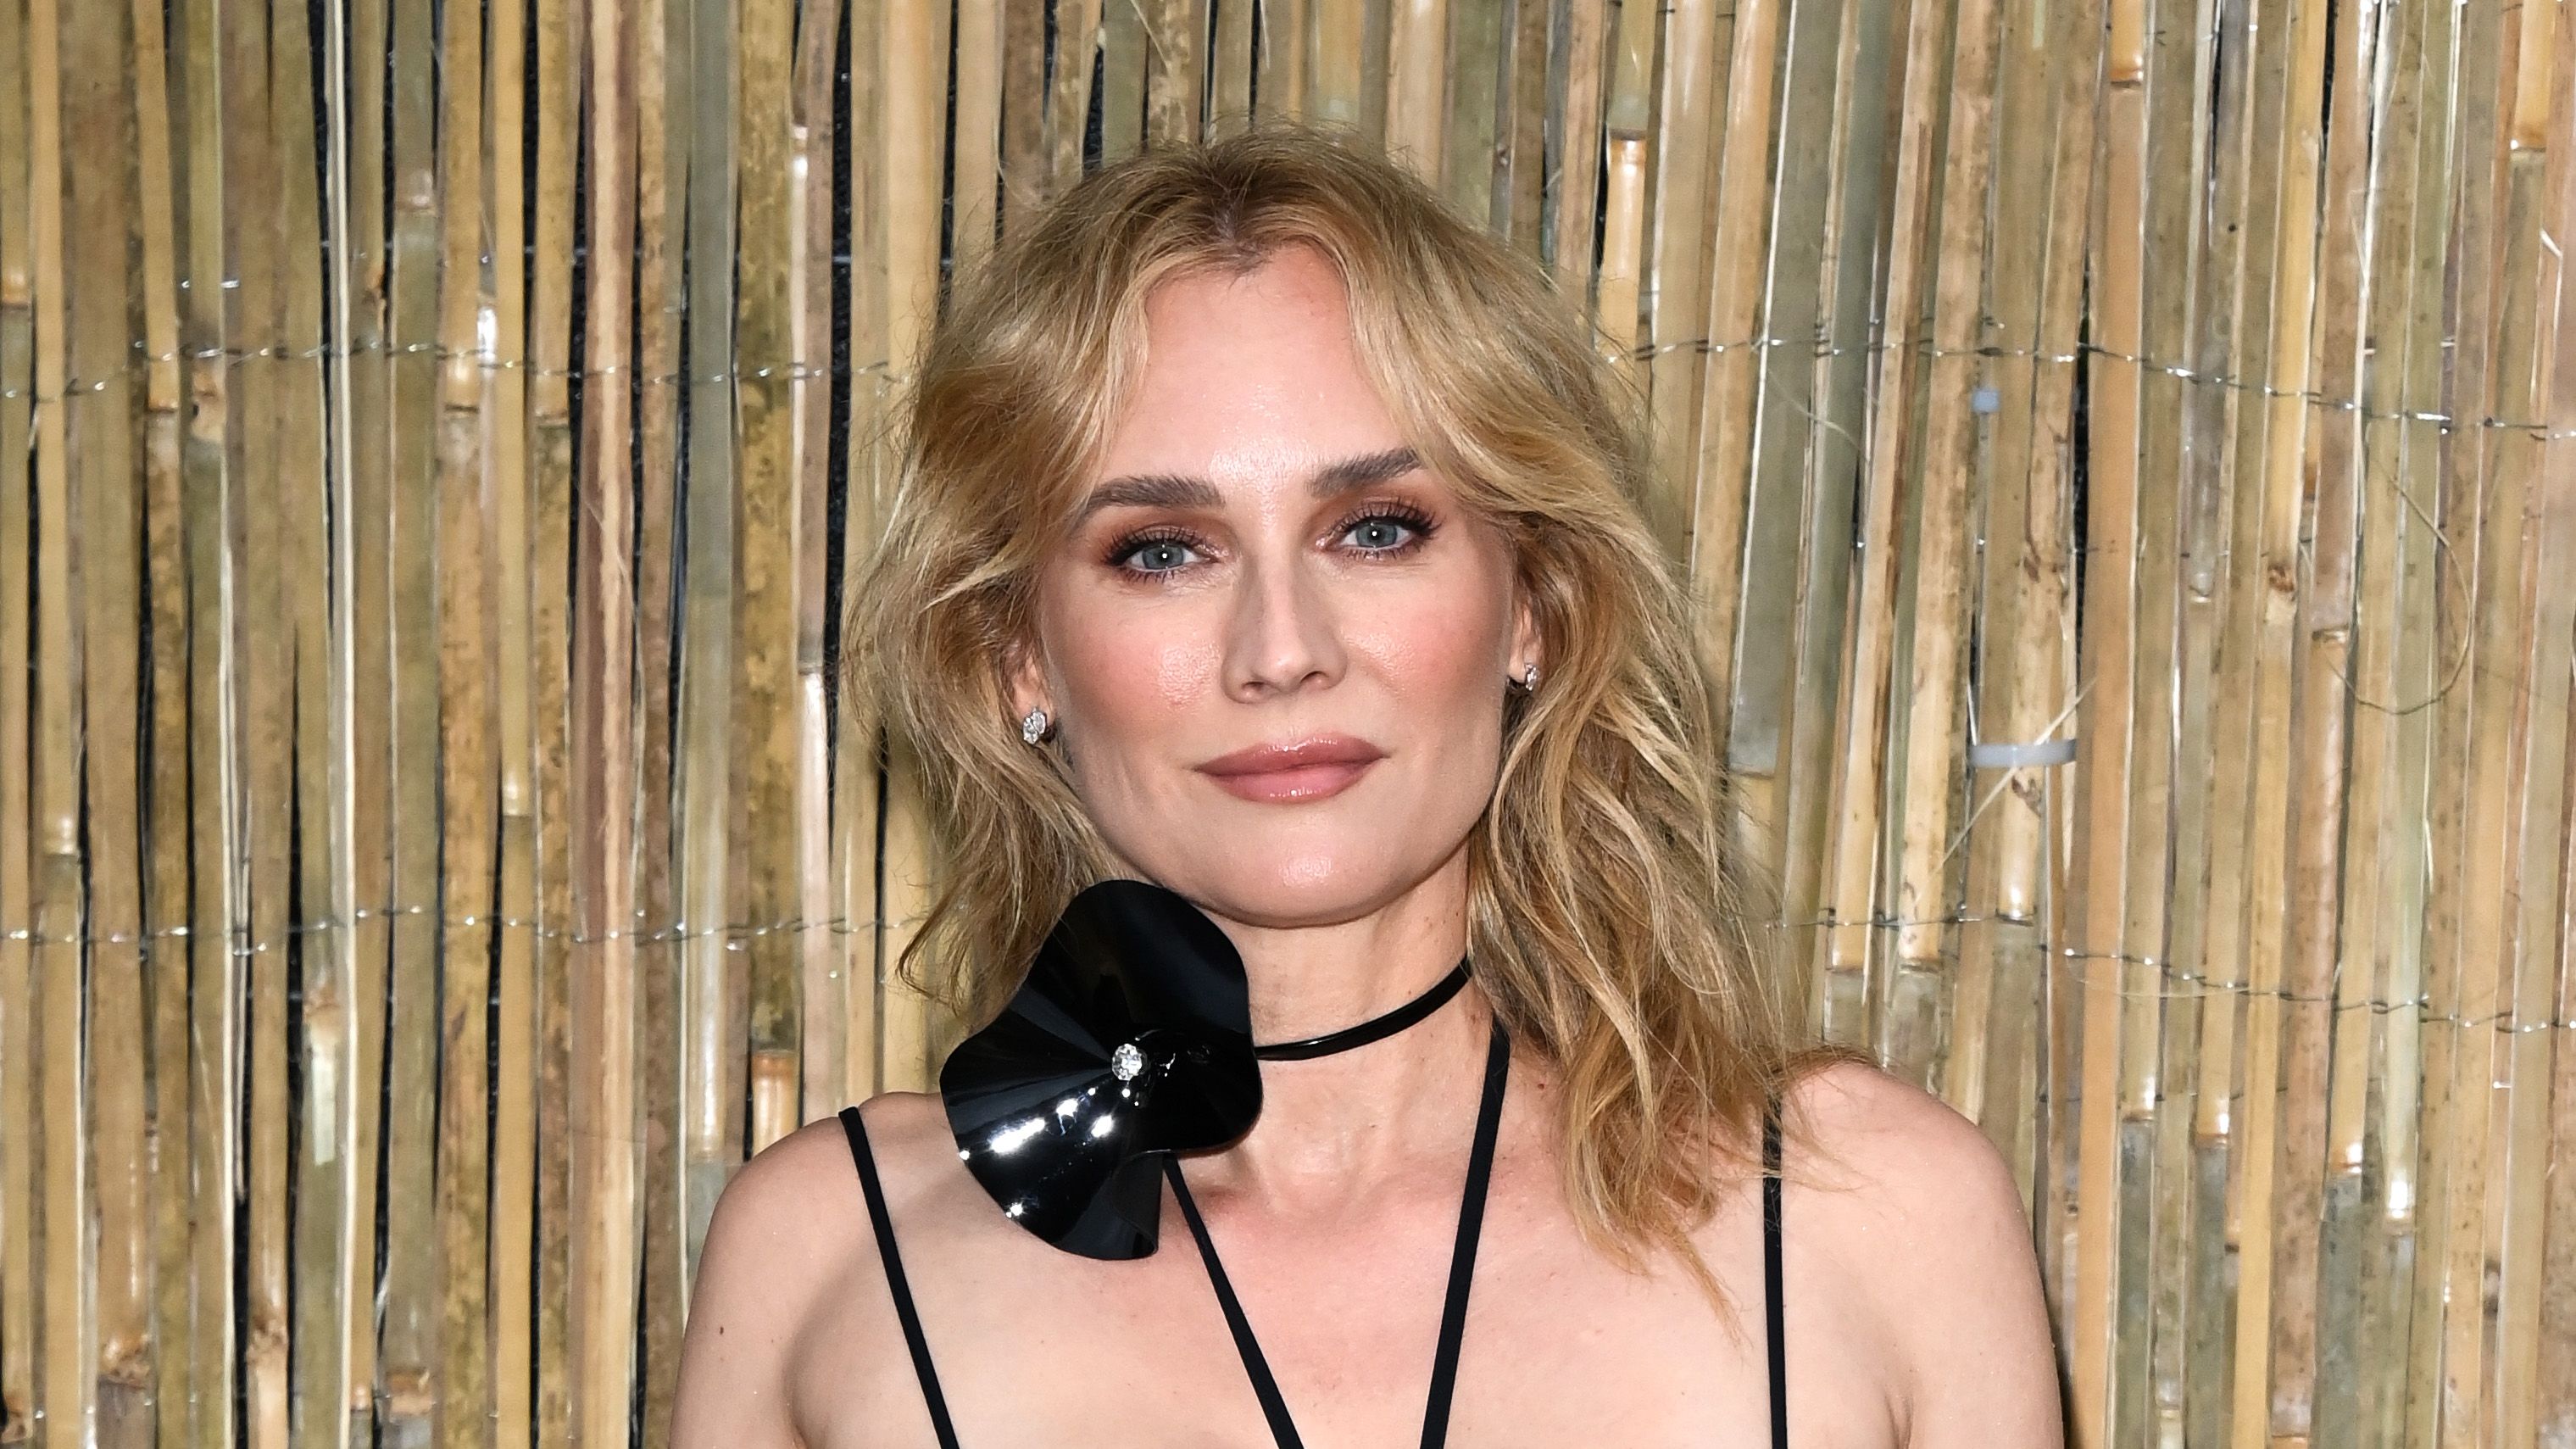 Diane Kruger's new mullet shag haircut is transformative